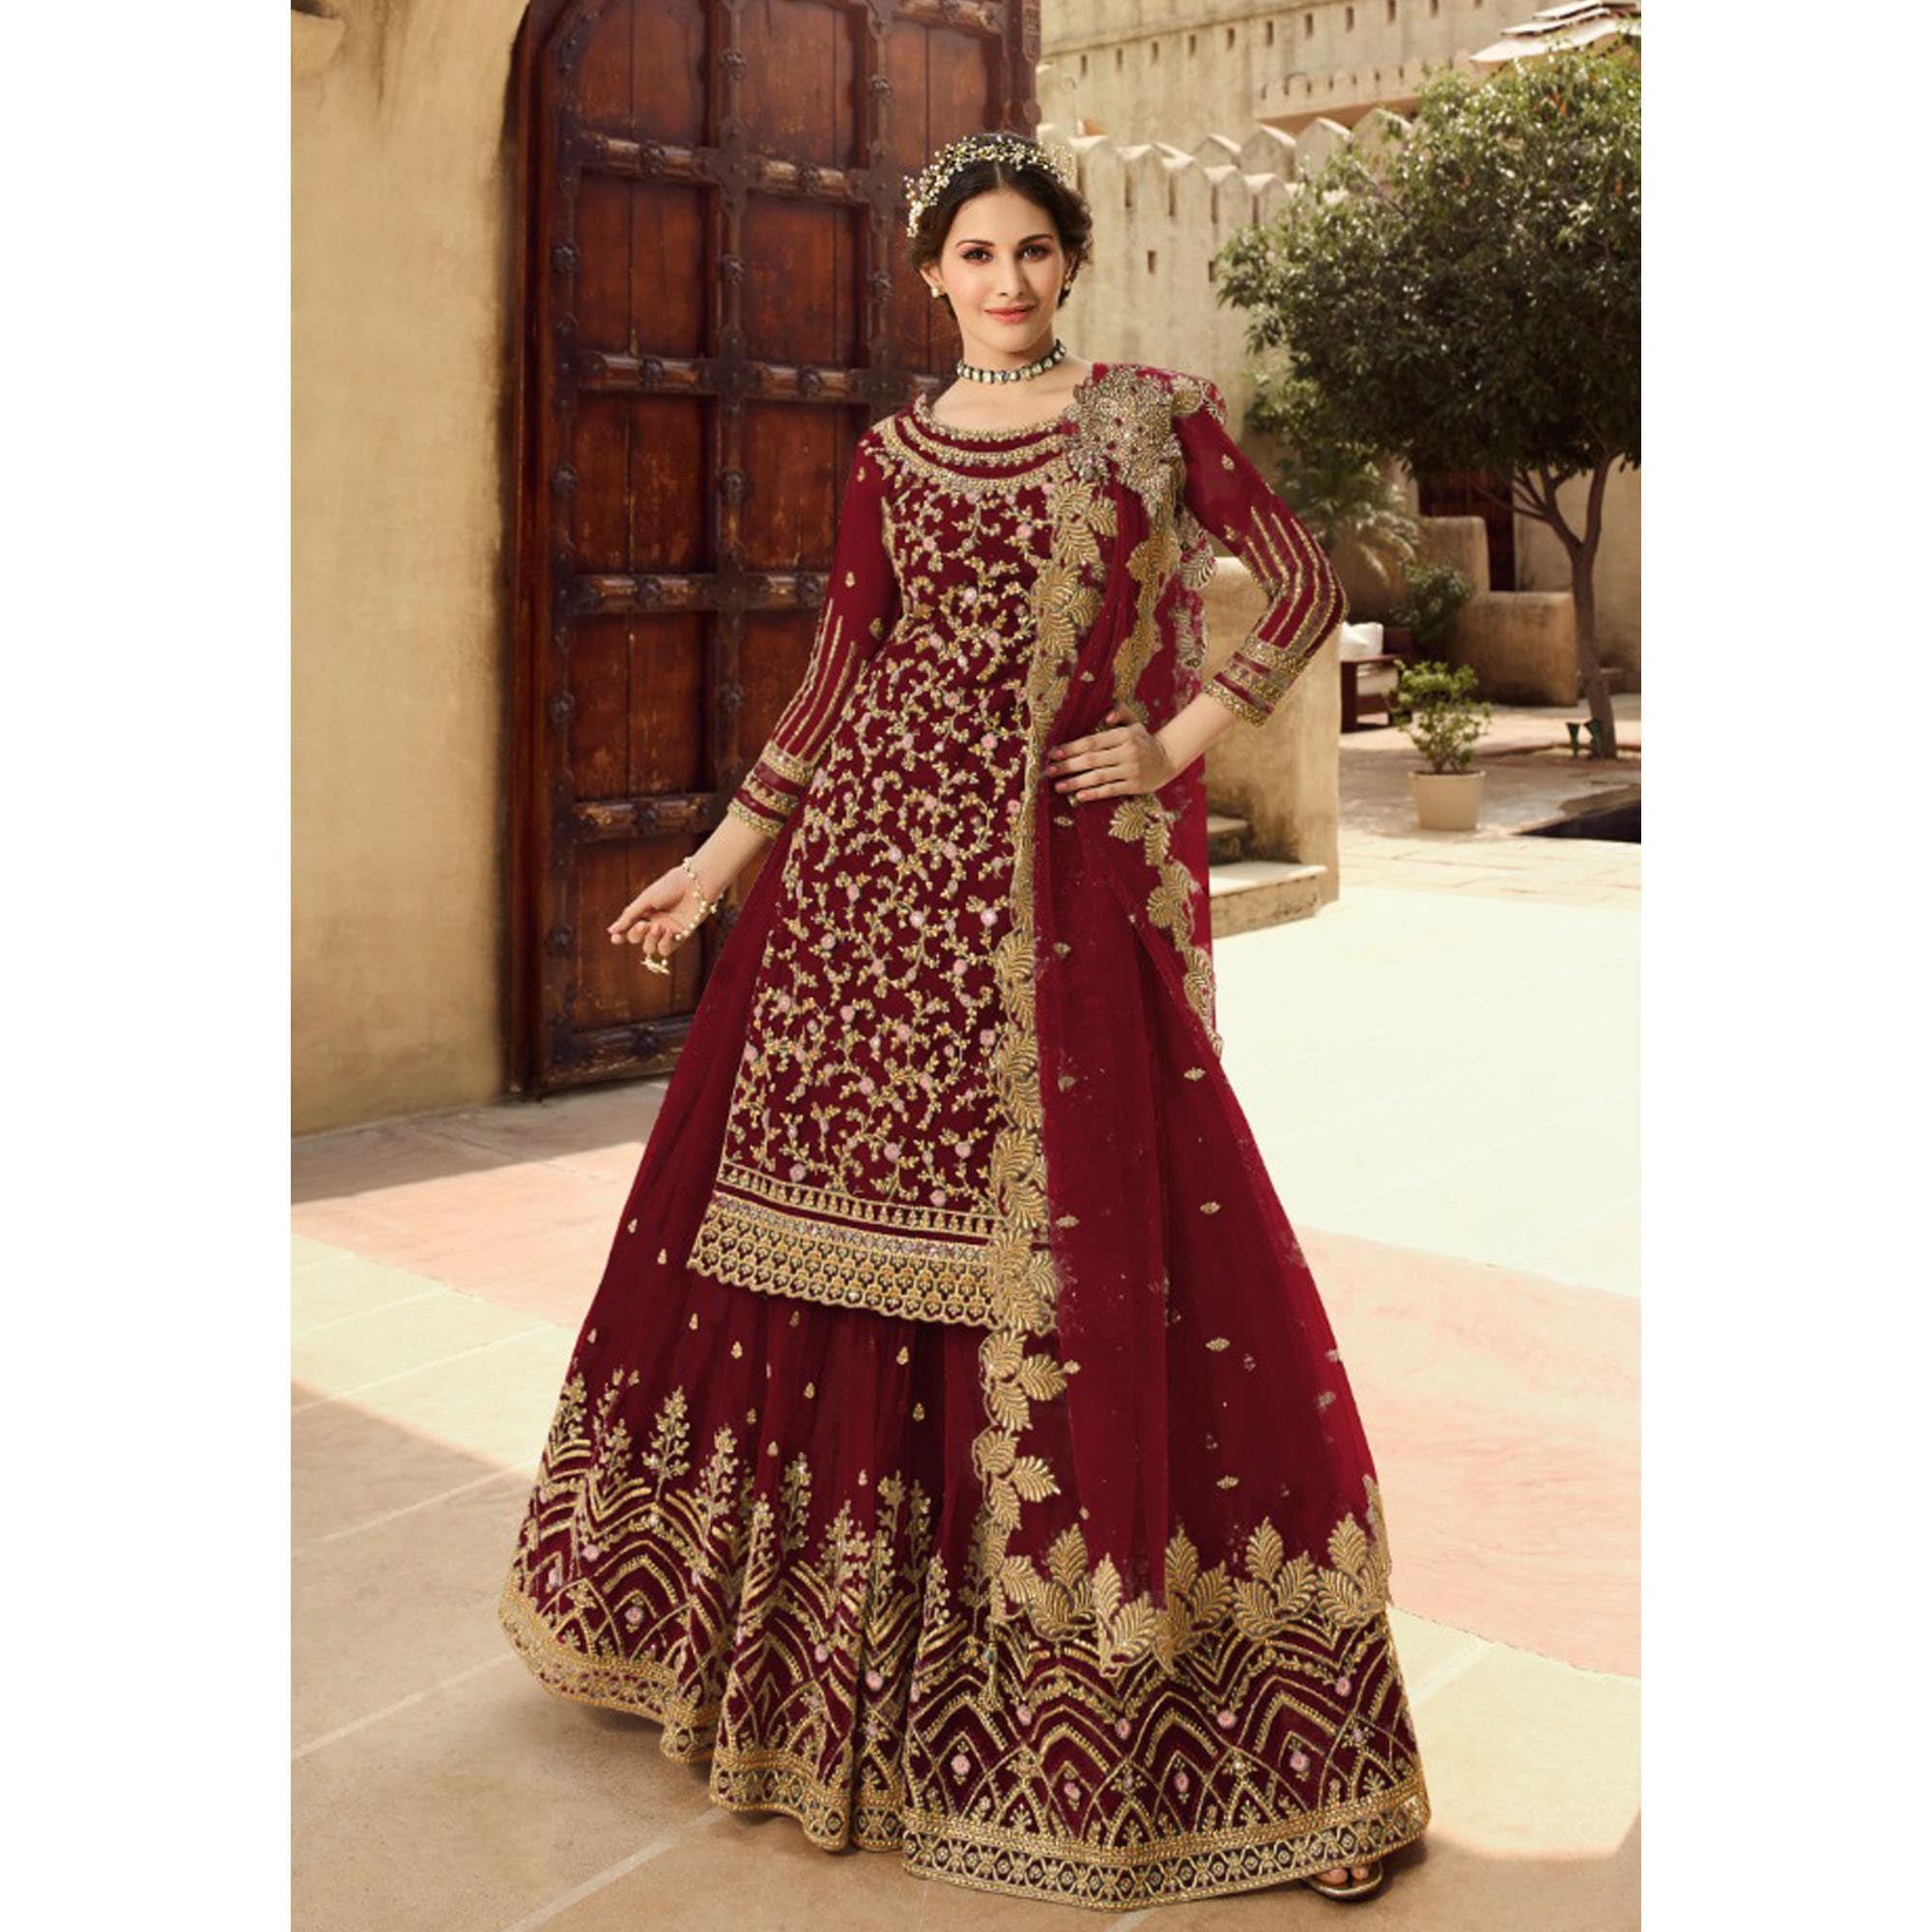 Wedding Wear Designer Sharara Pink Palazzo Suits Indian Ethnic Party Wear Designer Heavy Embroidery Worked Shalwar Kameez Dupatta Dress Clothing Womens Clothing Blazers & Suits 